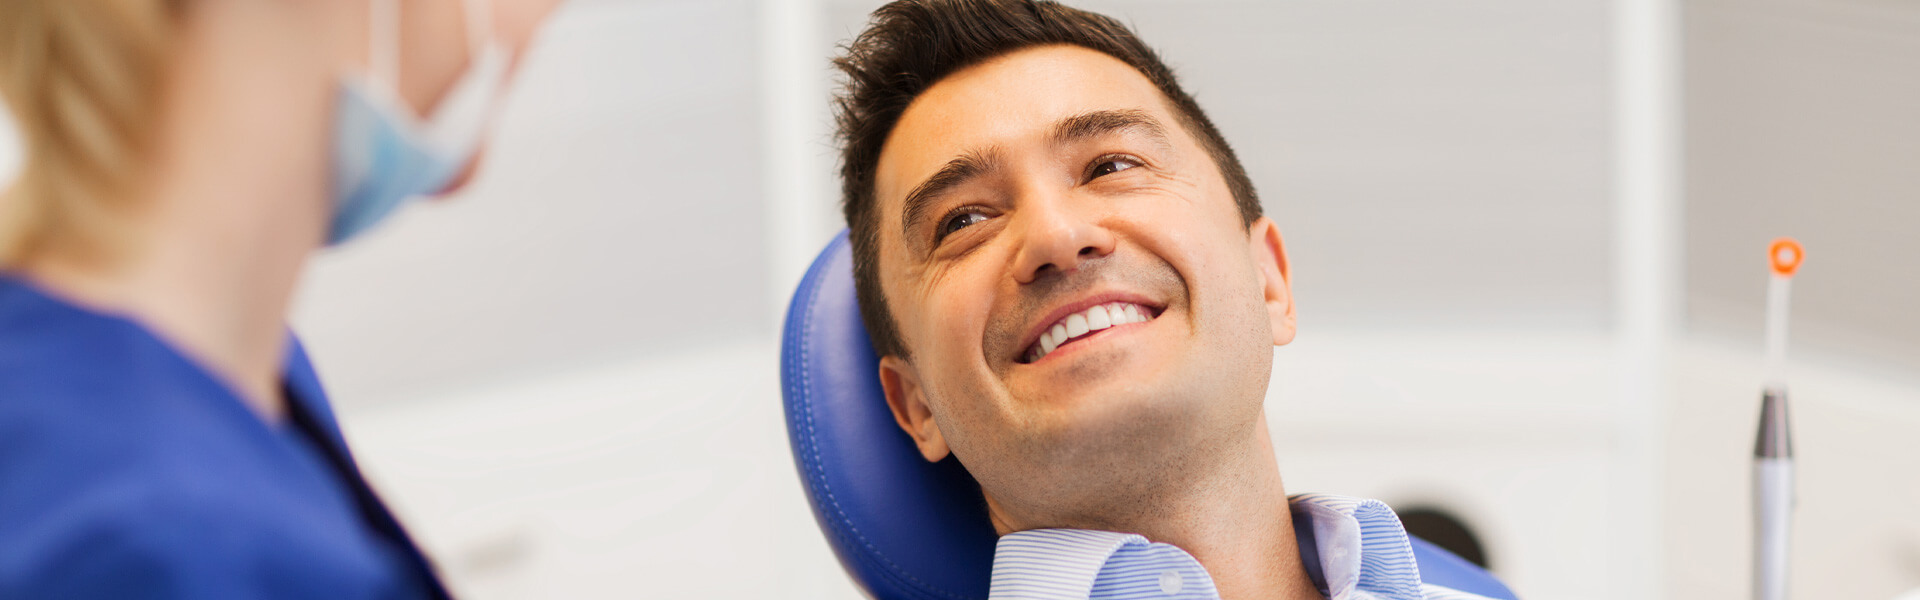 Male patient smiling with dental assistant